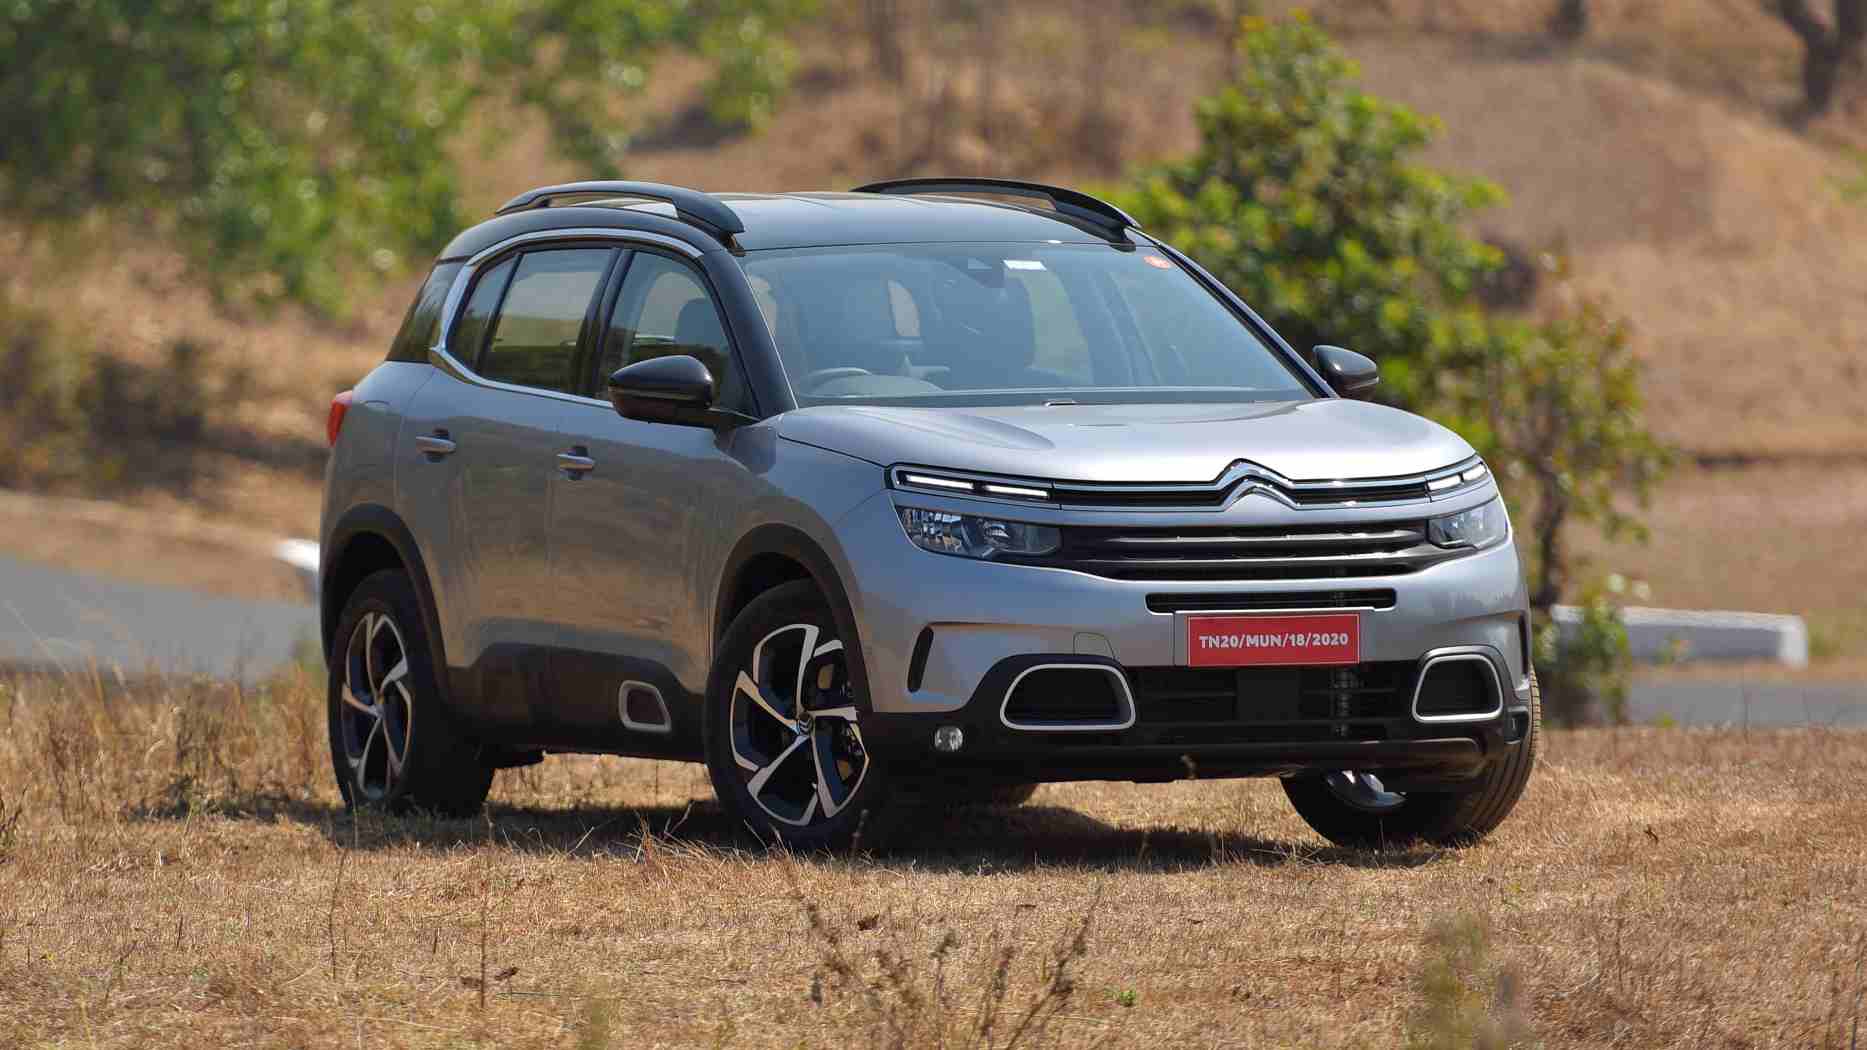 Citroen C5 Aircross India Review Almost Magic Carpet Like Definitely A Great Drive Technology News Firstpost